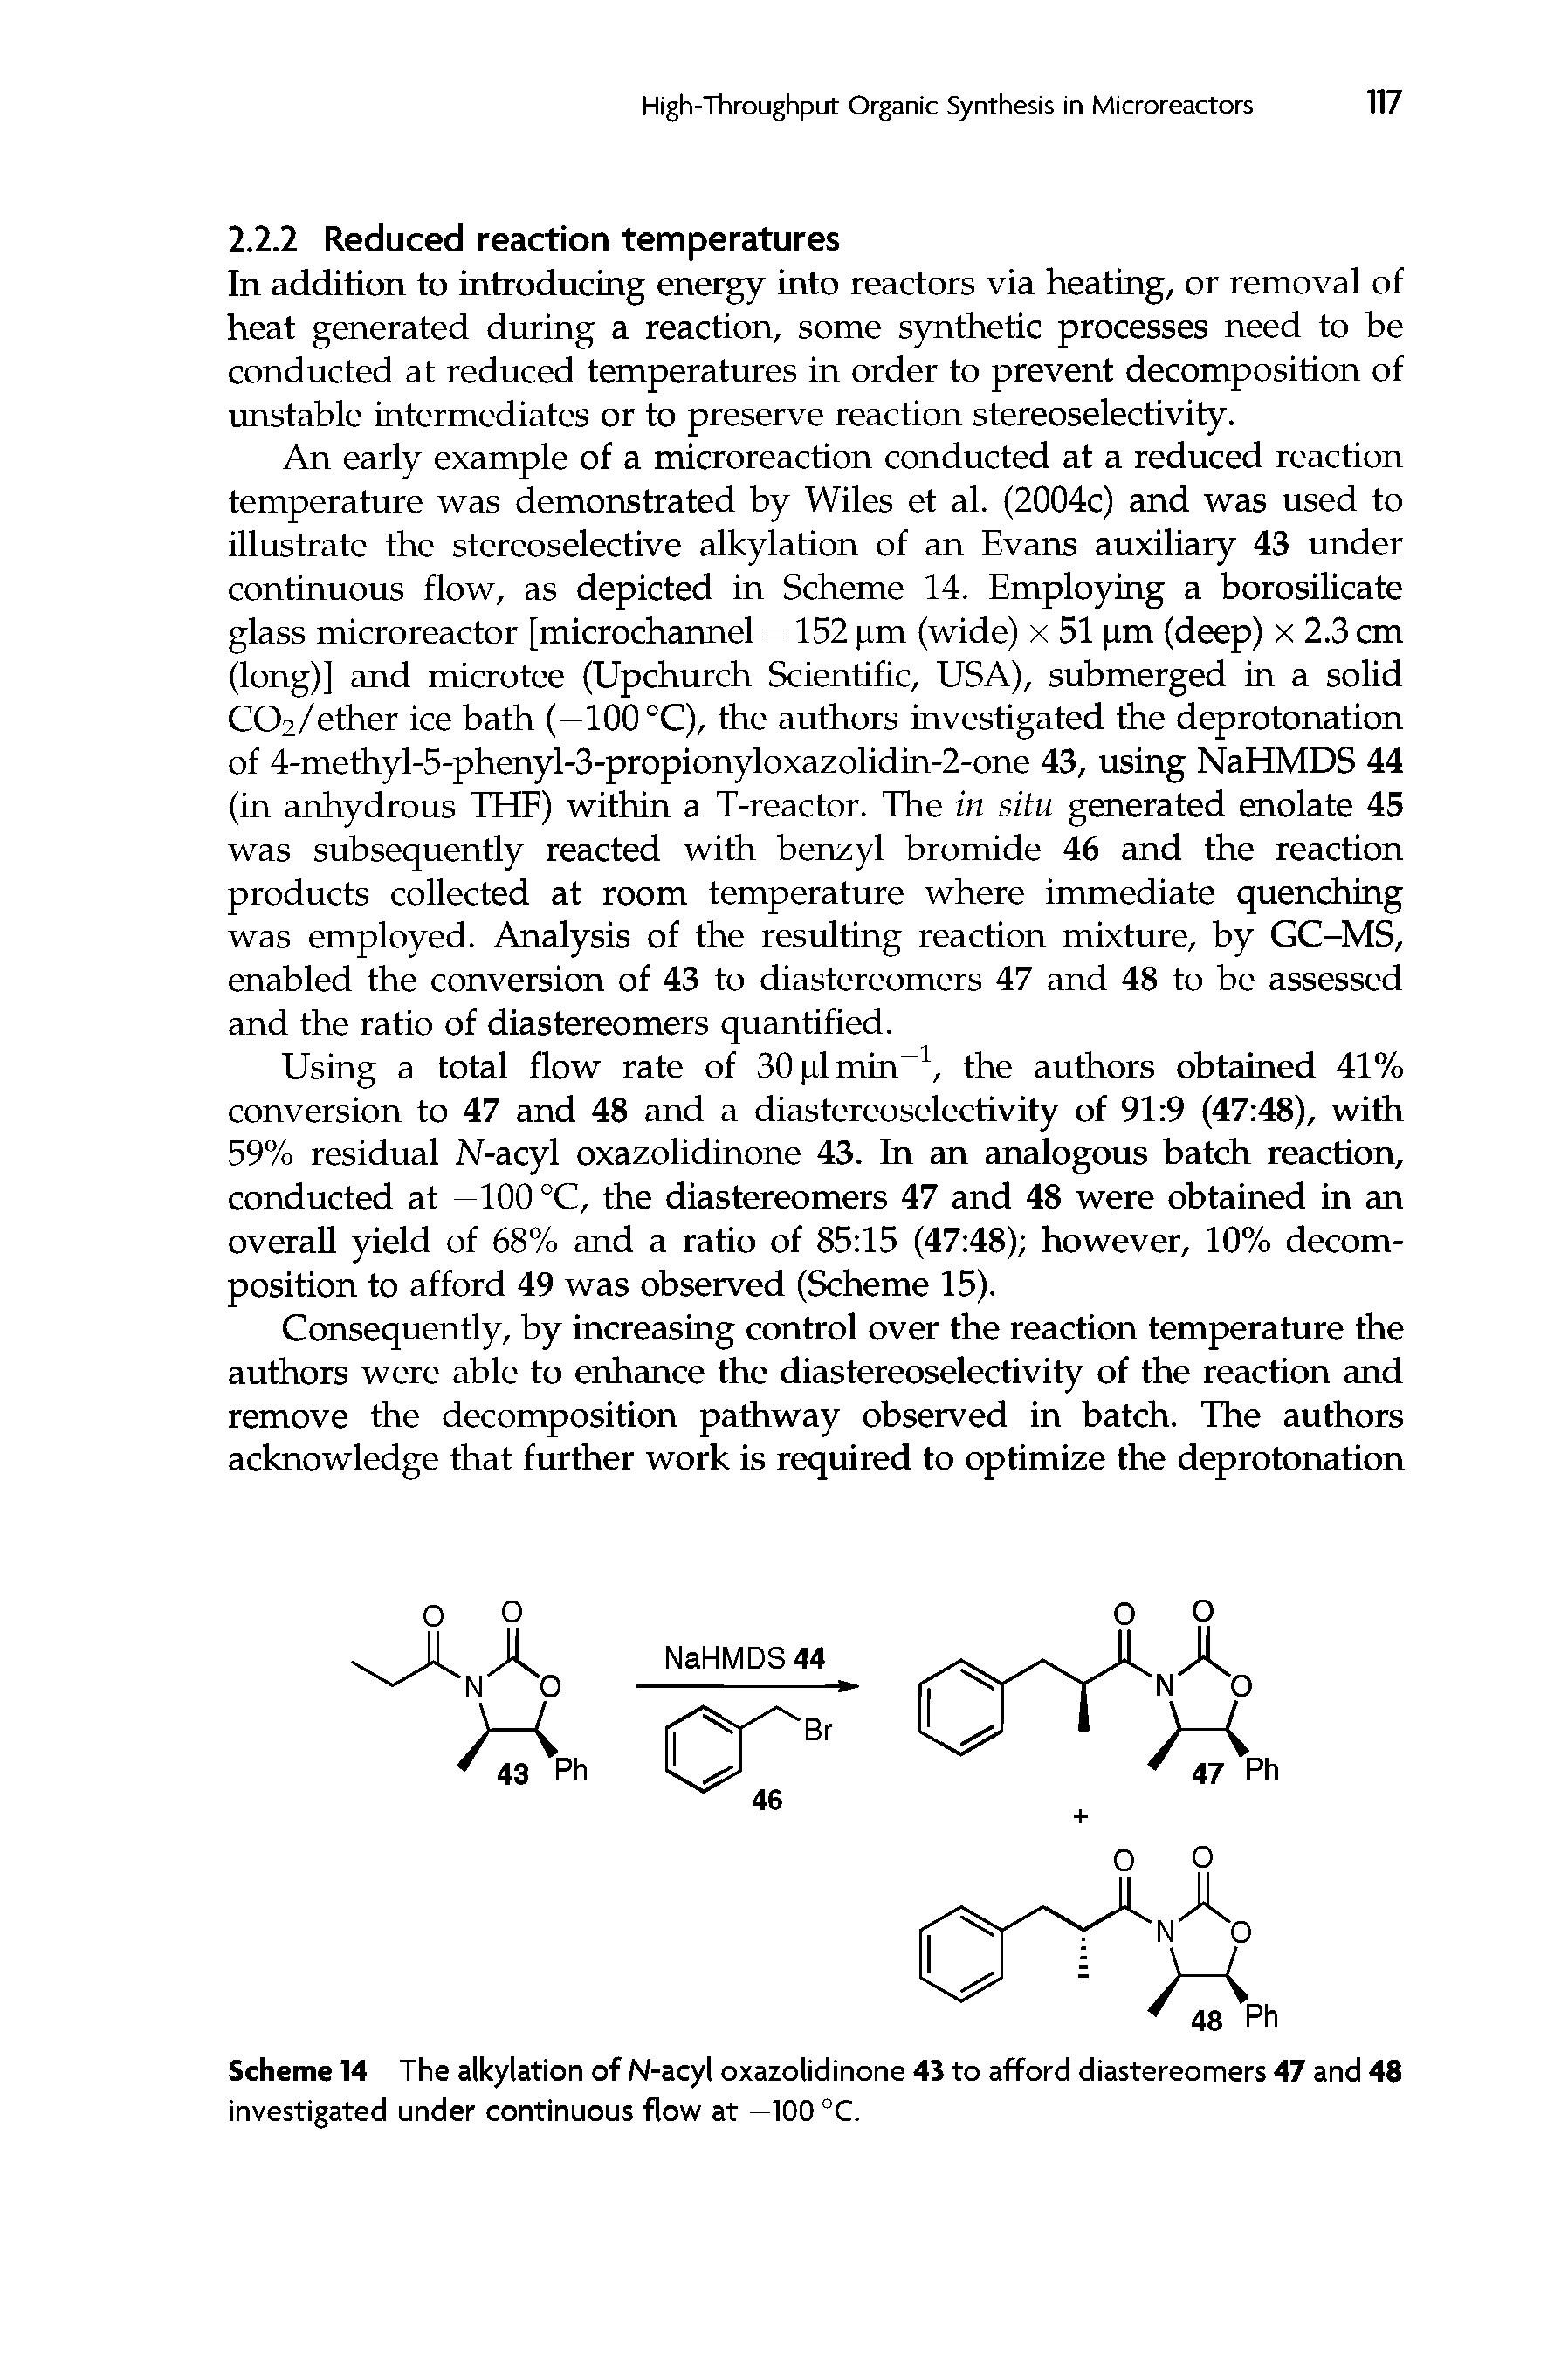 Scheme 14 The alkylation of N-acyl oxazolidinone 43 to afford diastereomers 47 and 48 investigated under continuous flow at —100 °C.